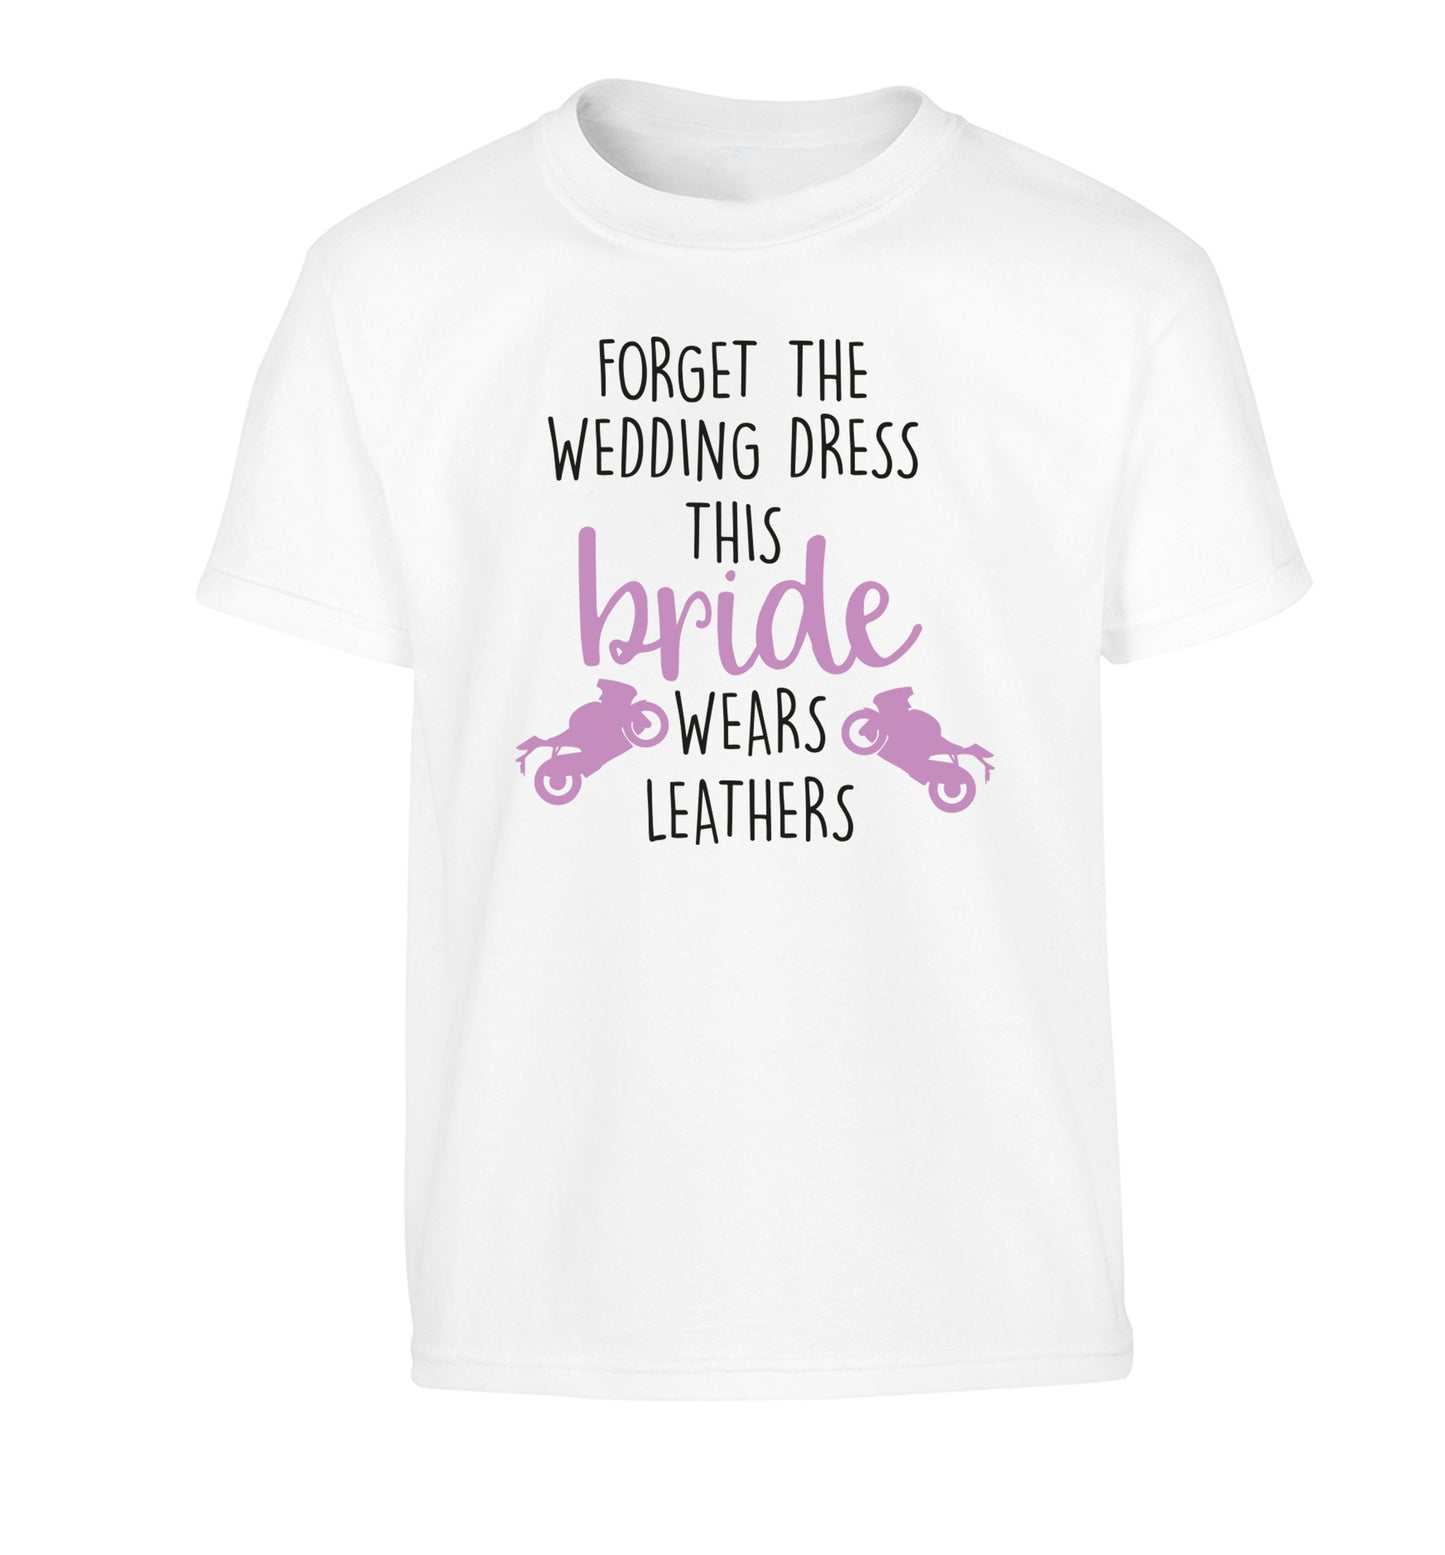 Forget the wedding dress this bride wears leathers Children's white Tshirt 12-13 Years